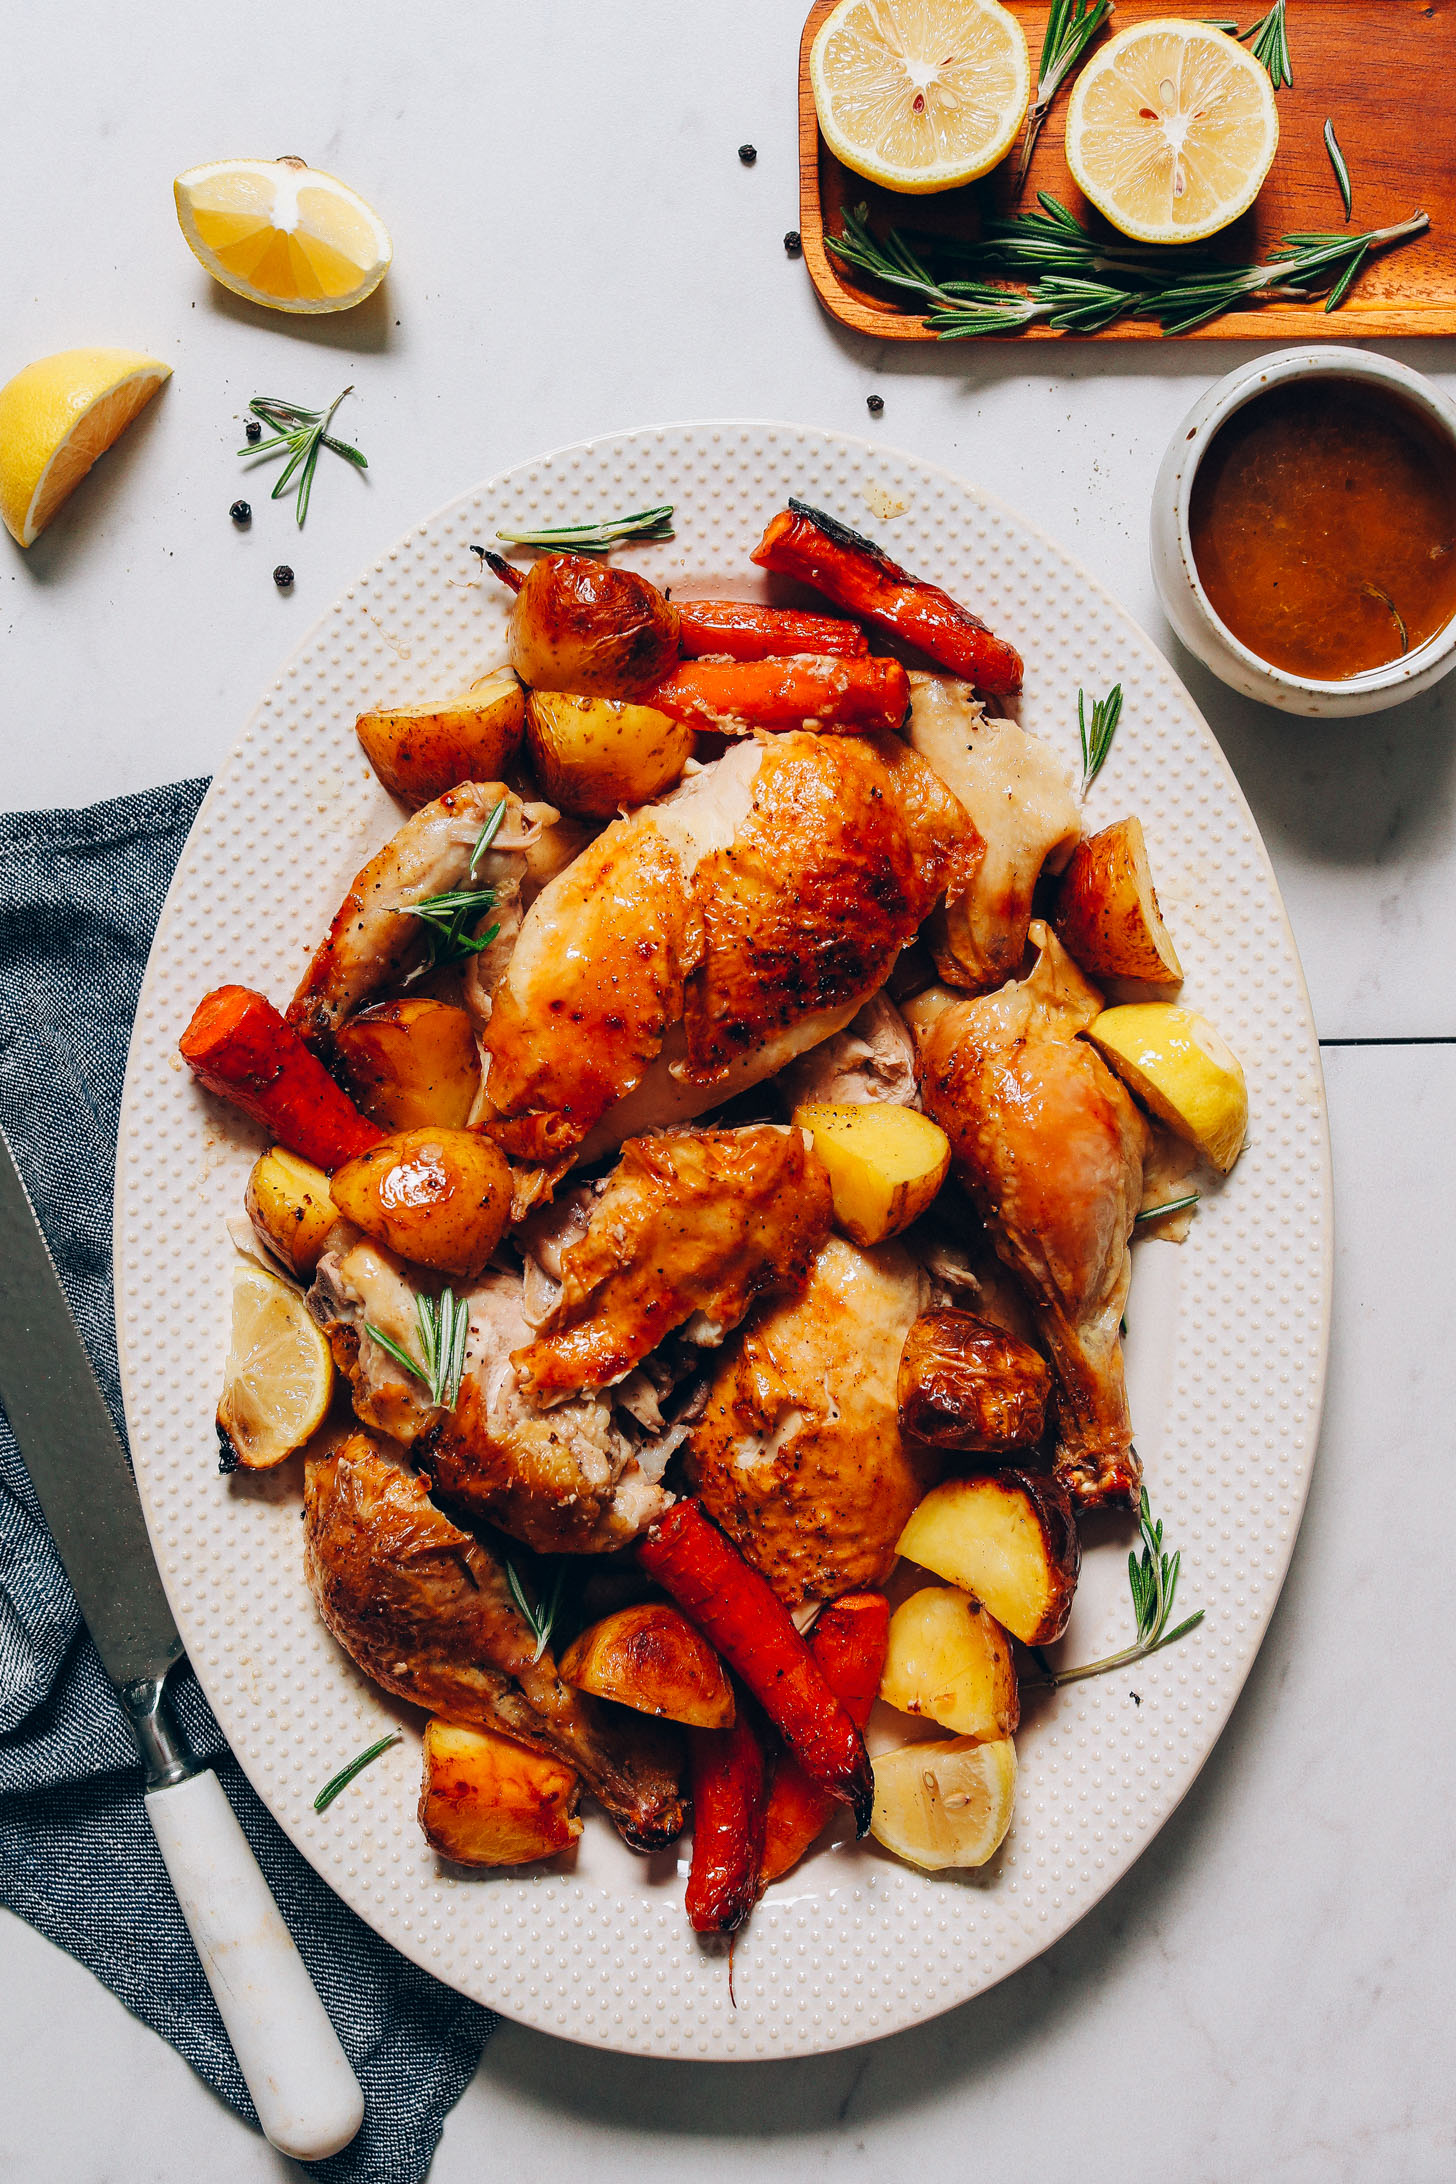 Large platter filled with Roasted Chicken and Vegetables beside gravy, lemons, and rosemary